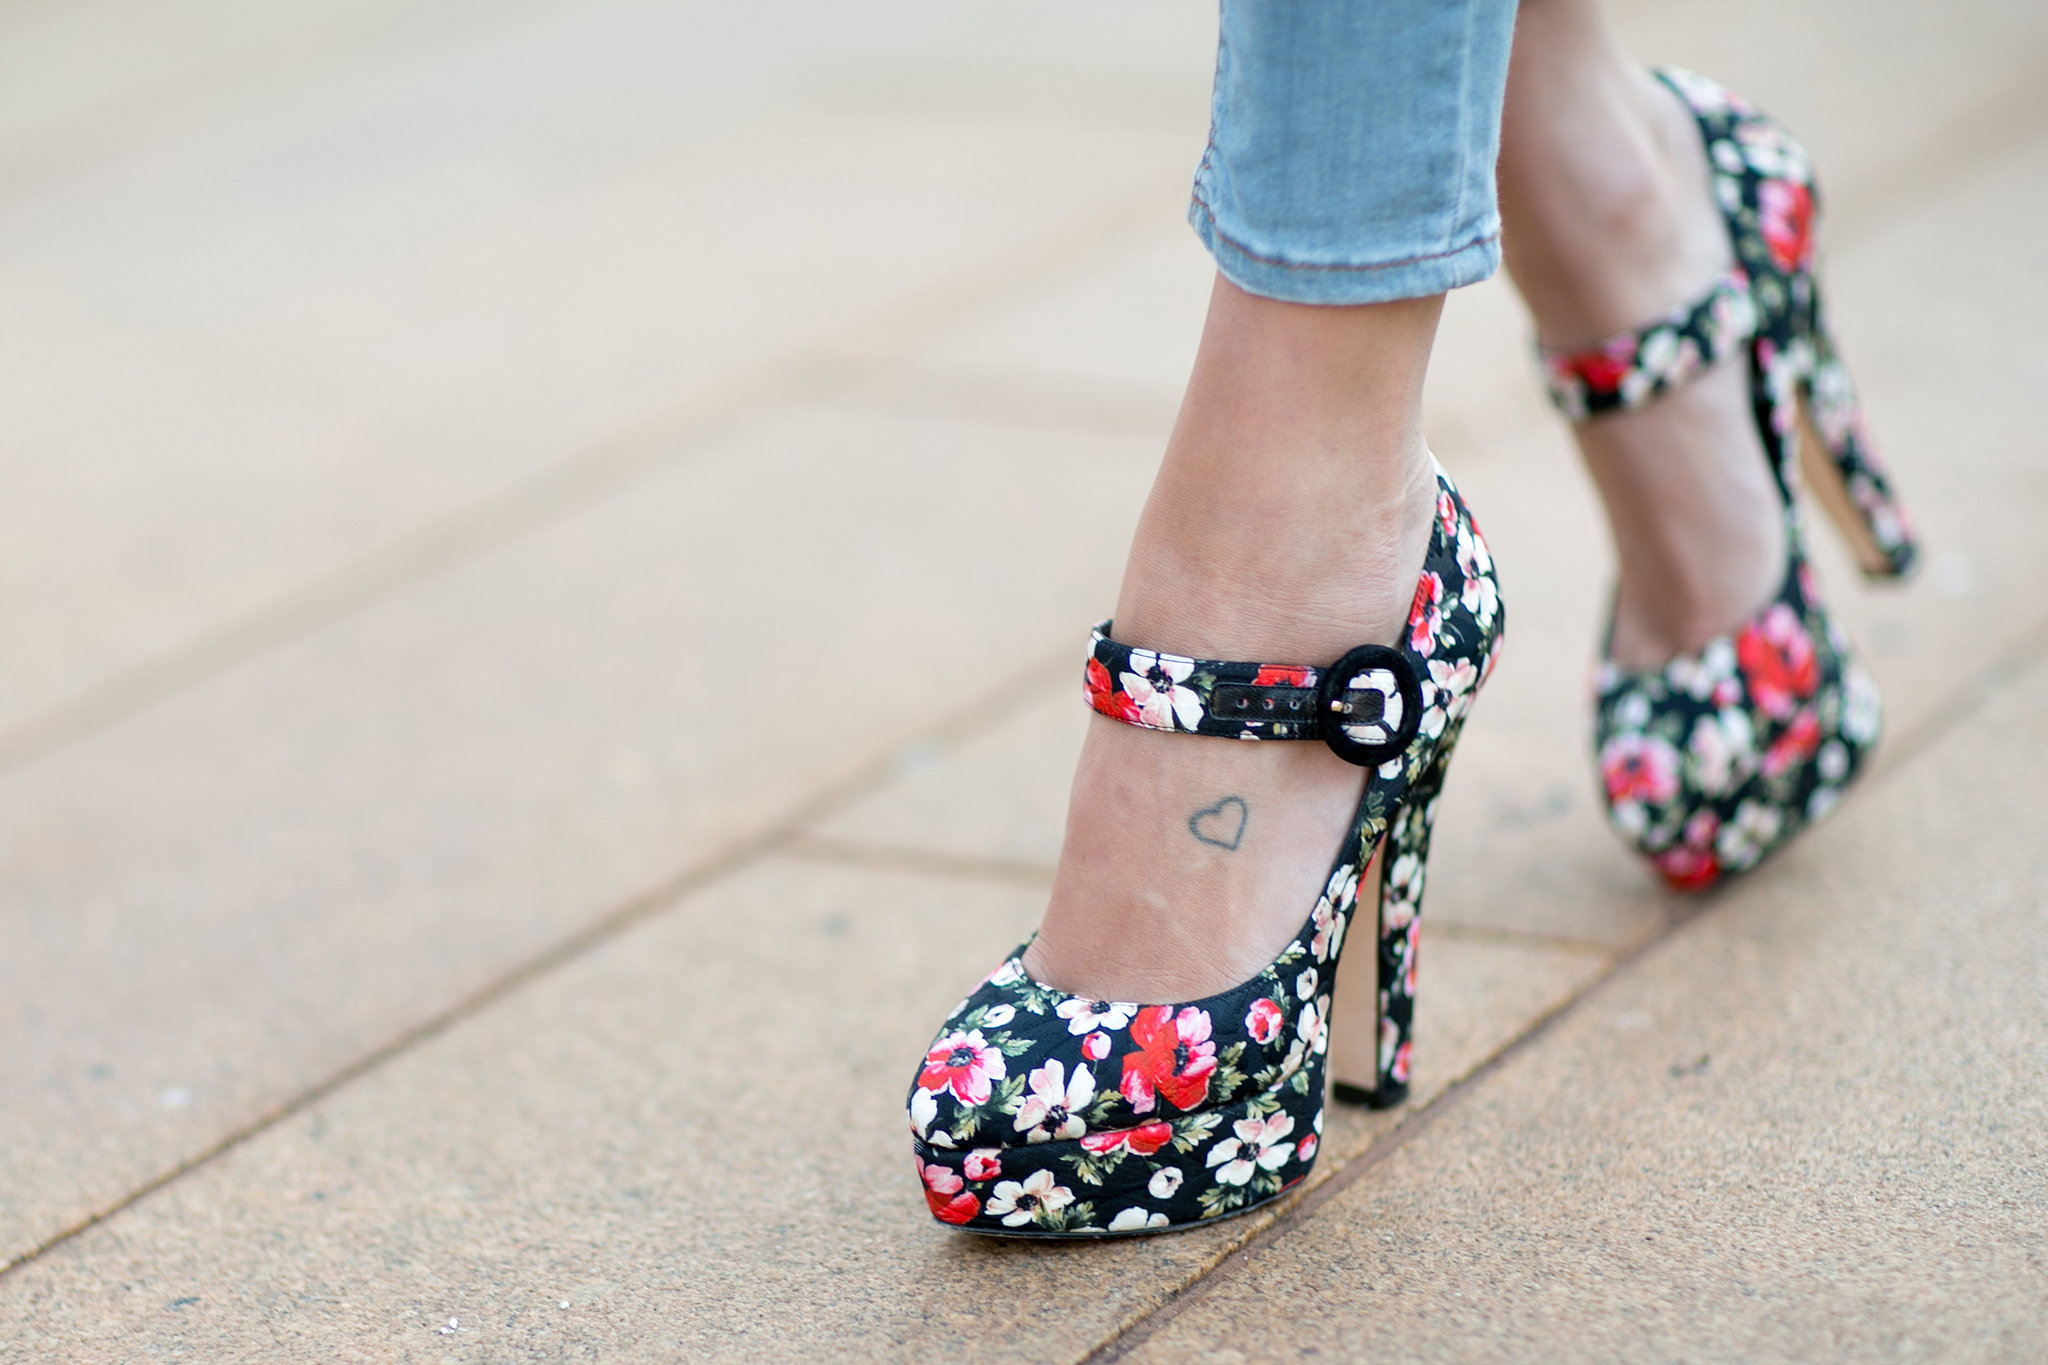 These could be the pretties pumps ever. 
